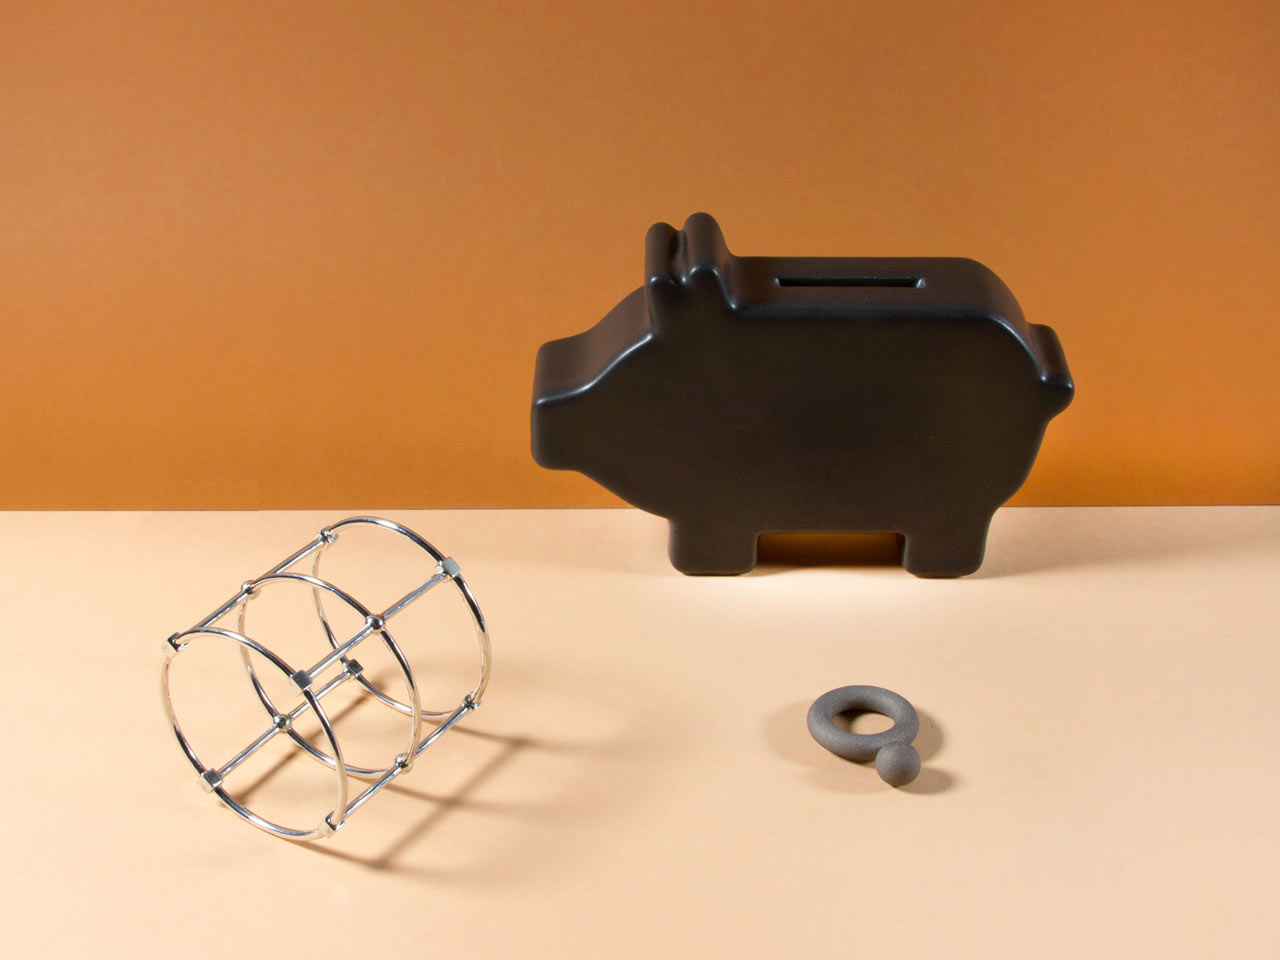 KWAMBIO Uses 3D Printing for Designed Objects on Demand